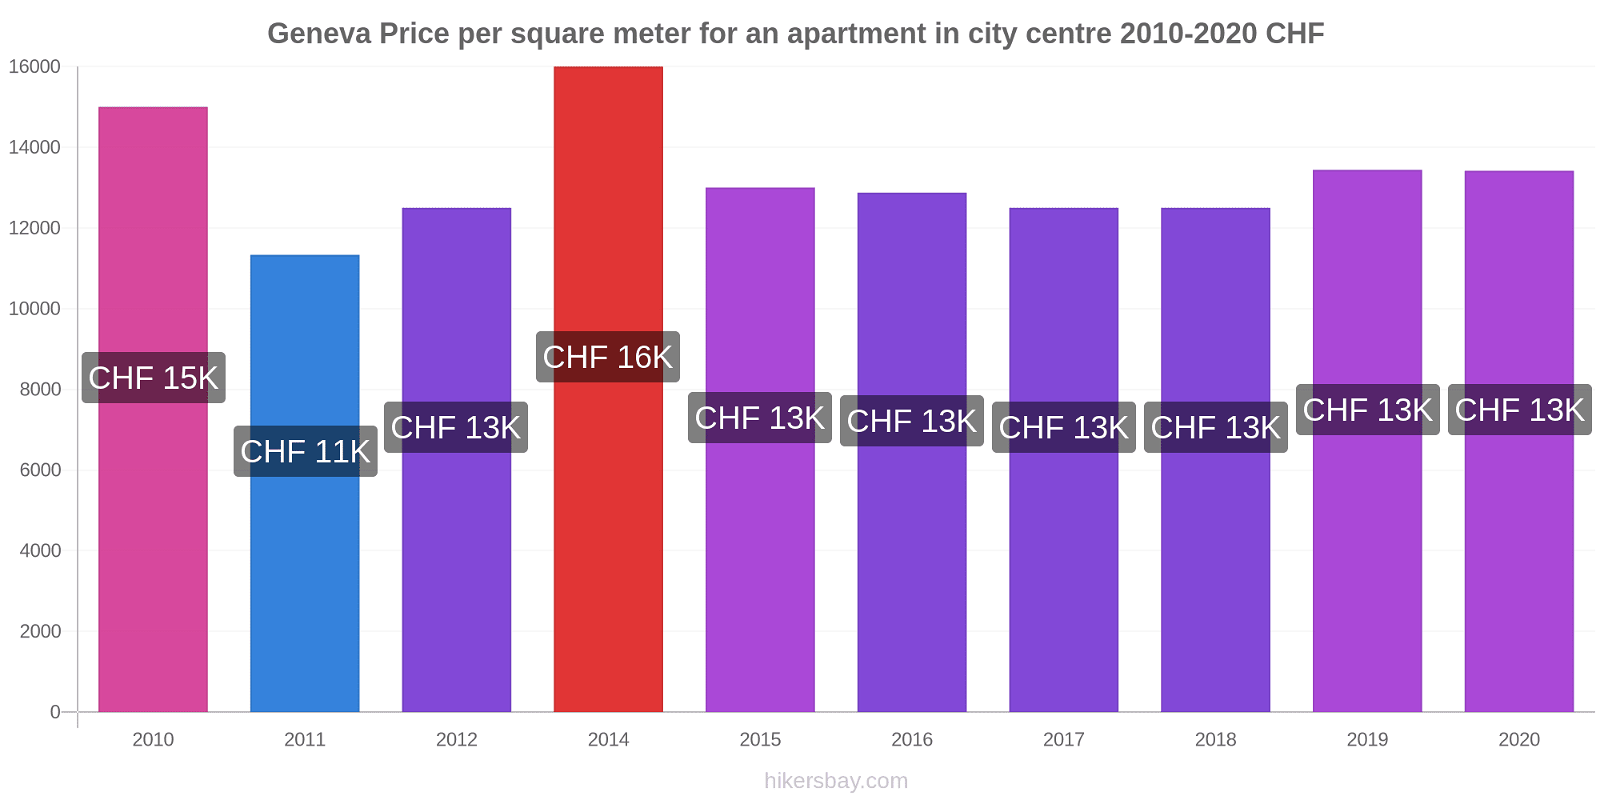 Geneva price changes Price per square meter for an apartment in city centre hikersbay.com